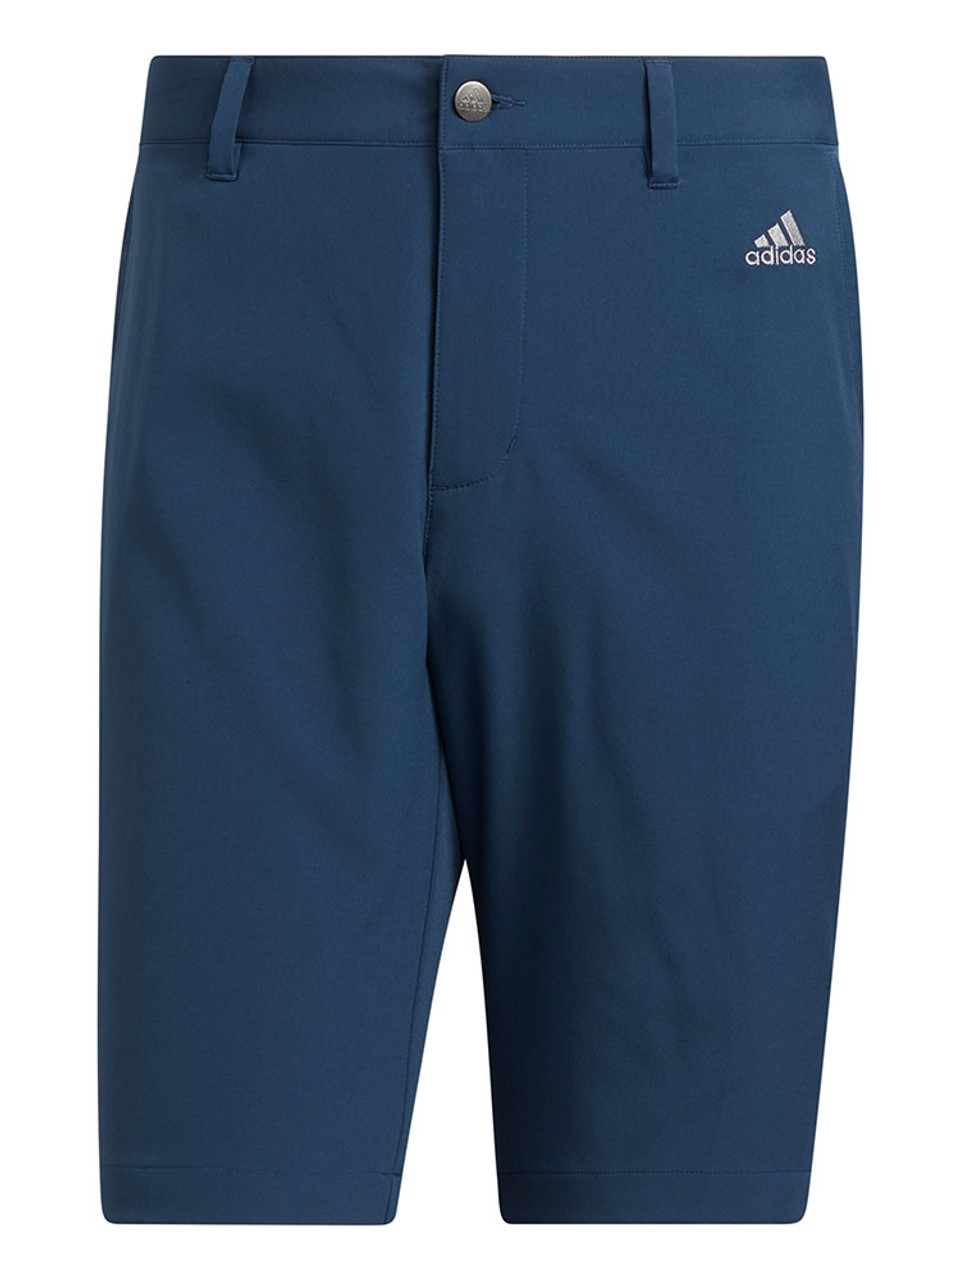 adidas Recycled Content Golf Shorts - Crew Navy - Mens | GolfBox